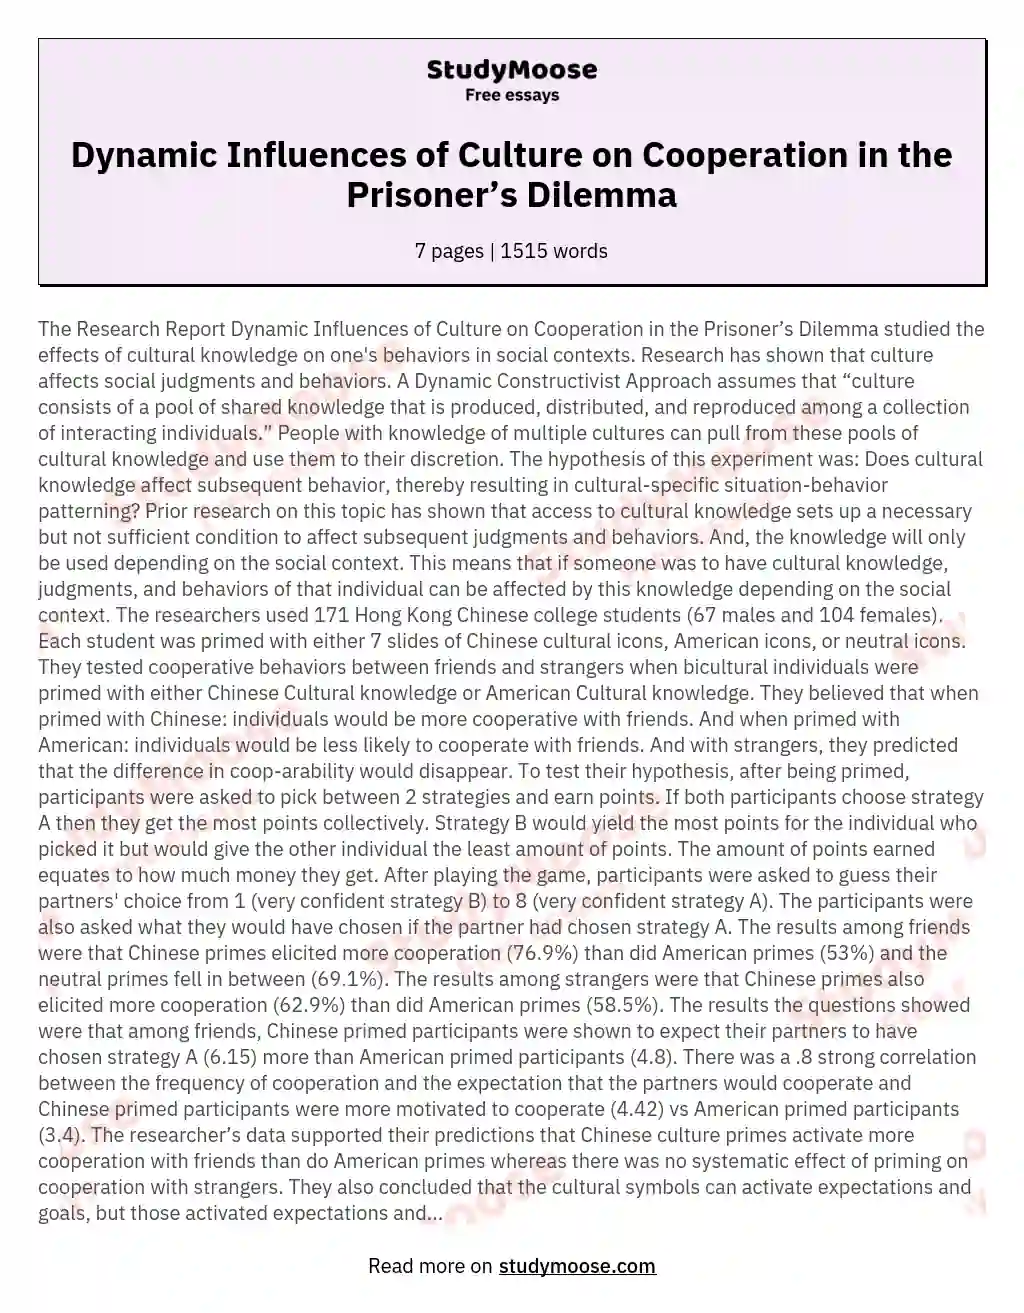 Dynamic Influences of Culture on Cooperation in the Prisoner’s Dilemma essay